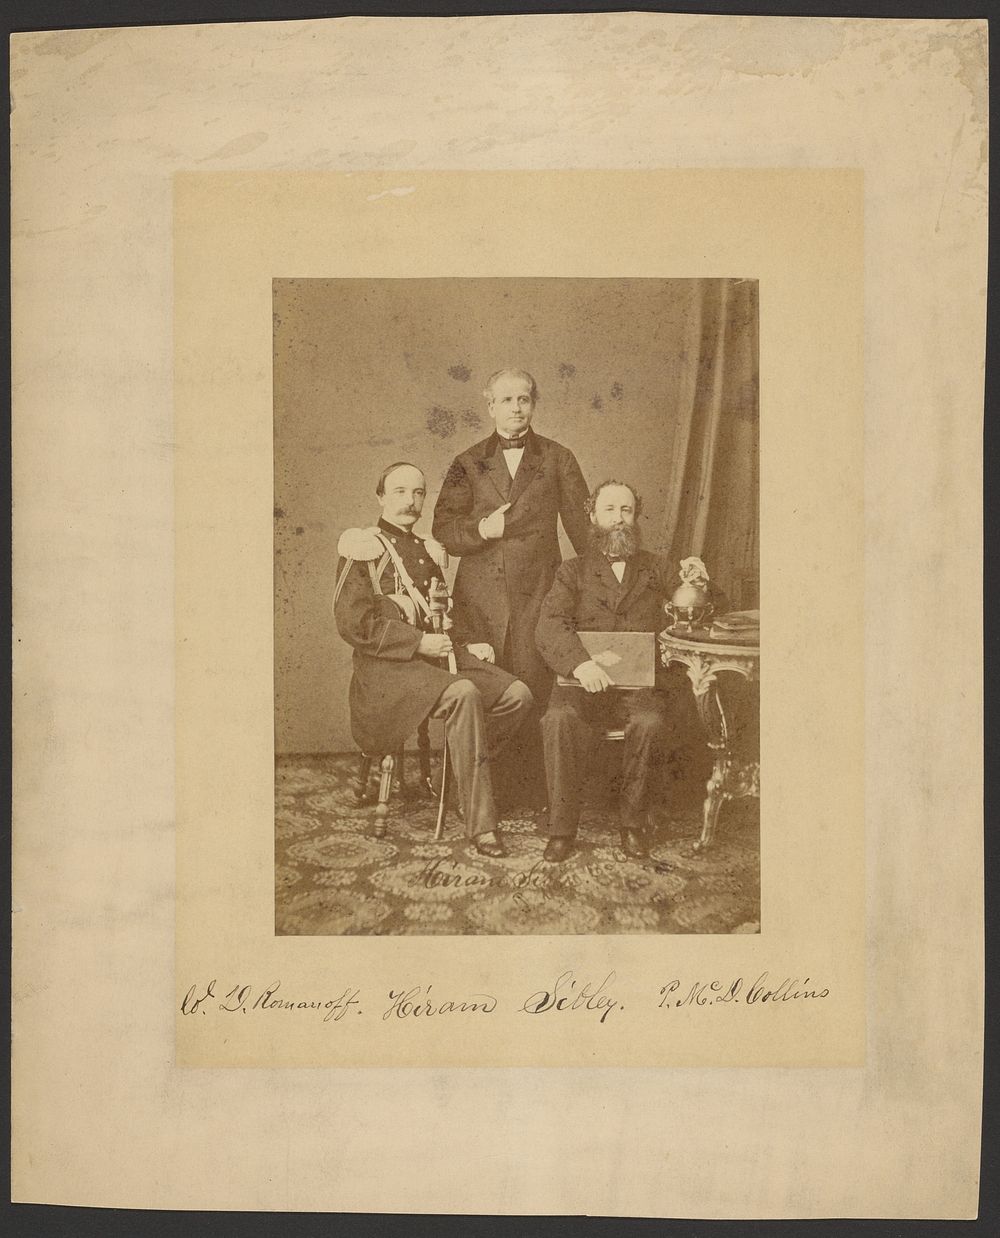 Colonel Romanov, Hiram Sibley, and Perry Collins discussing Russian-American Telegraph project